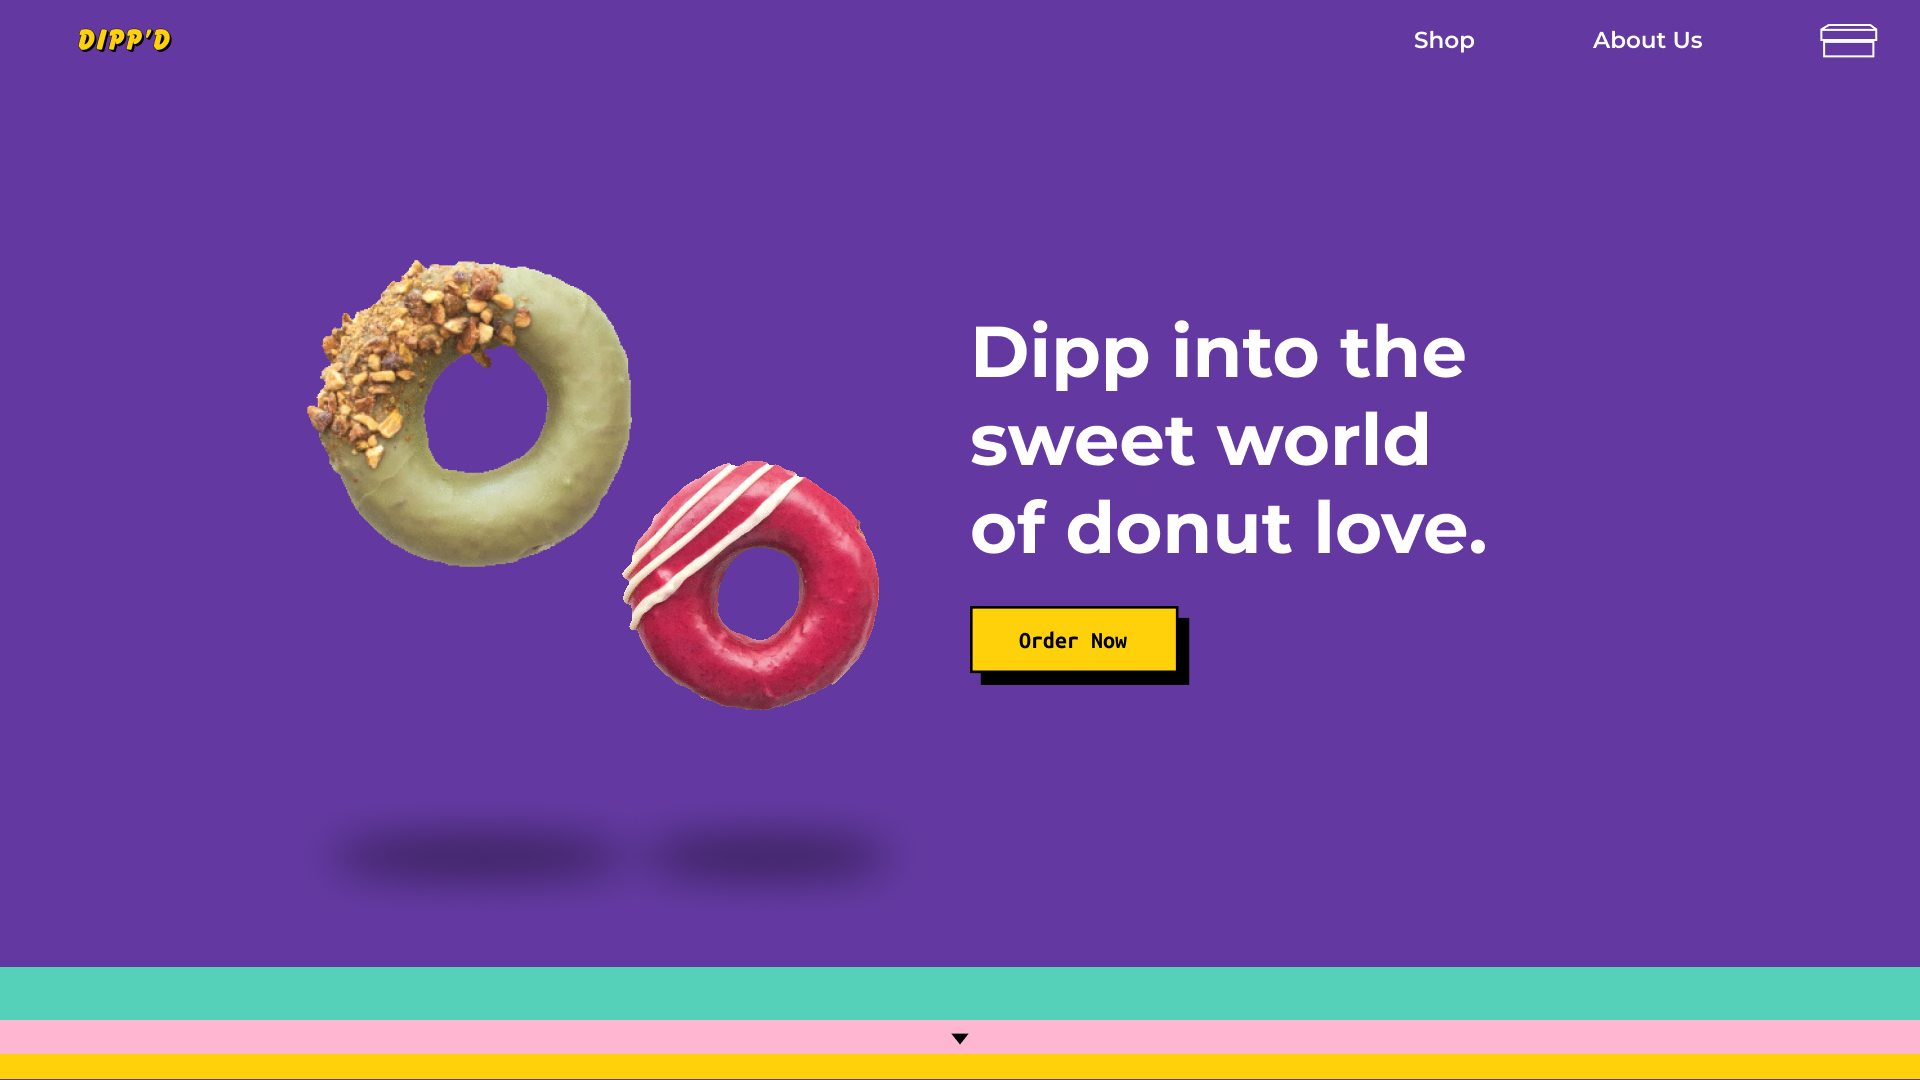 The landing page of the Dipp'd donuts website